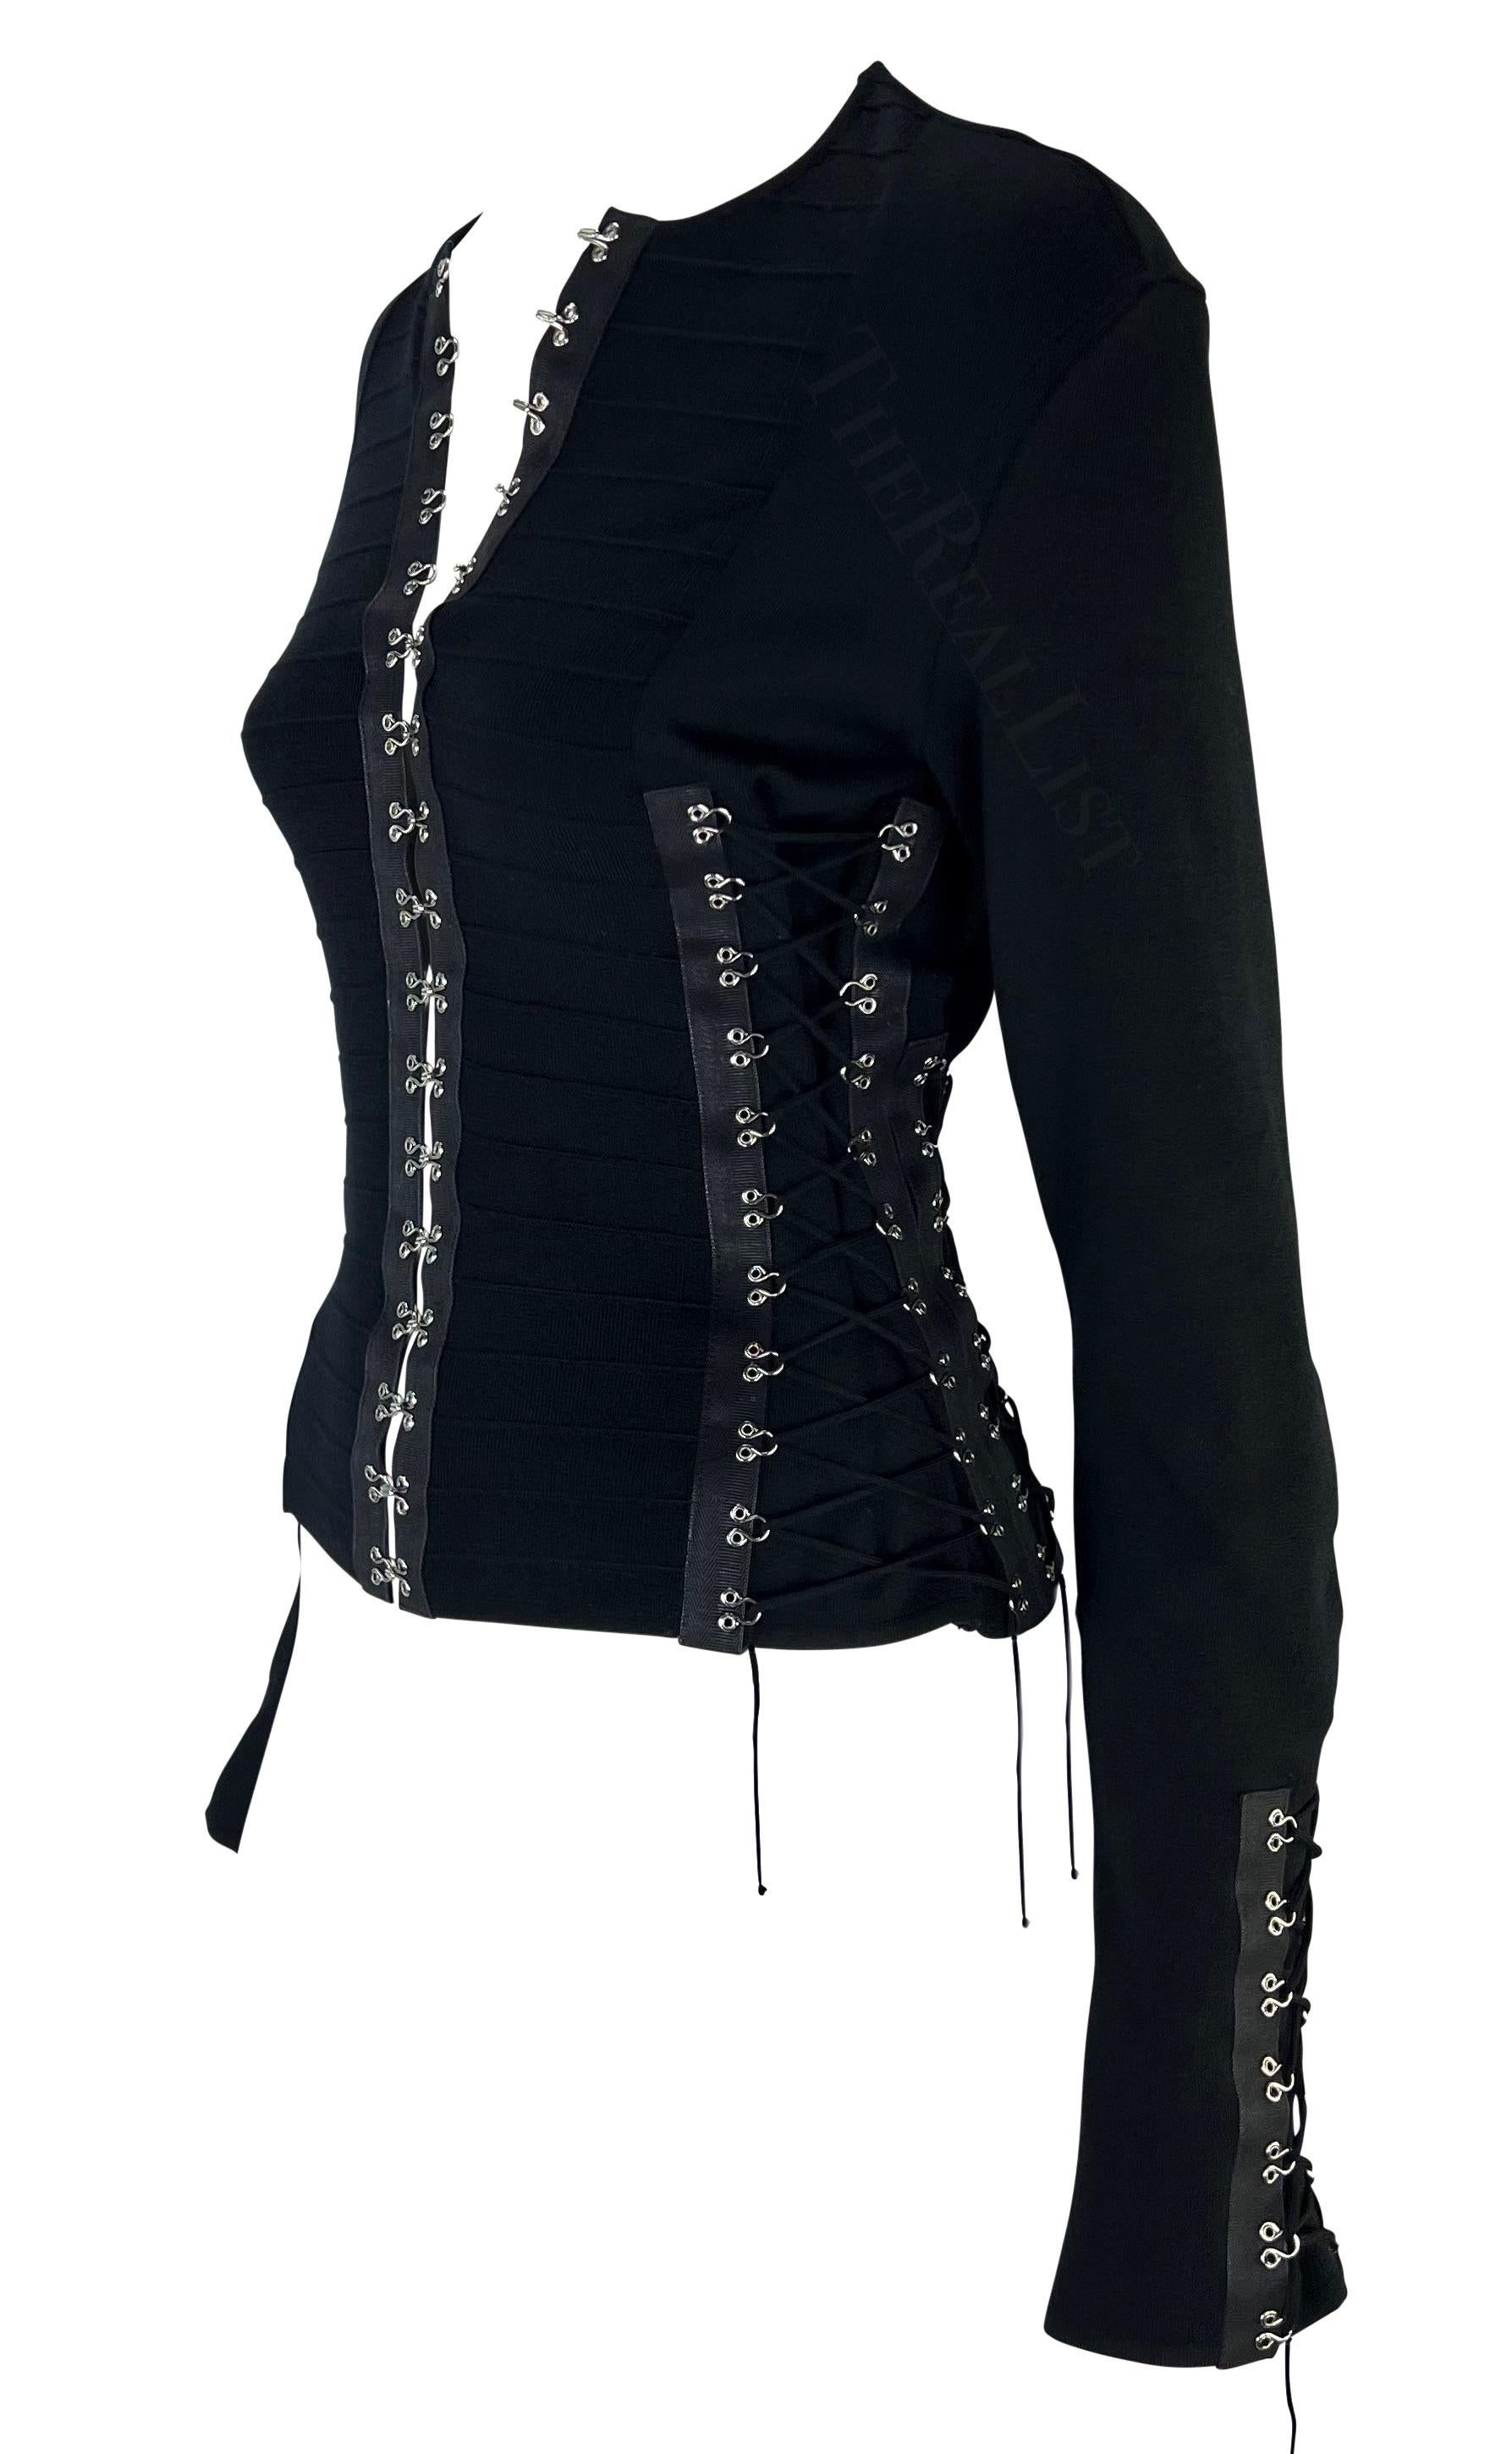 Presenting an incredible black hook and eye knit John Galliano cardigan. From his Spring/Summer 2003 collection, this fabulous form-fitting sweater features hook and eye closures at the front closure with lace-up details around the torso and at the